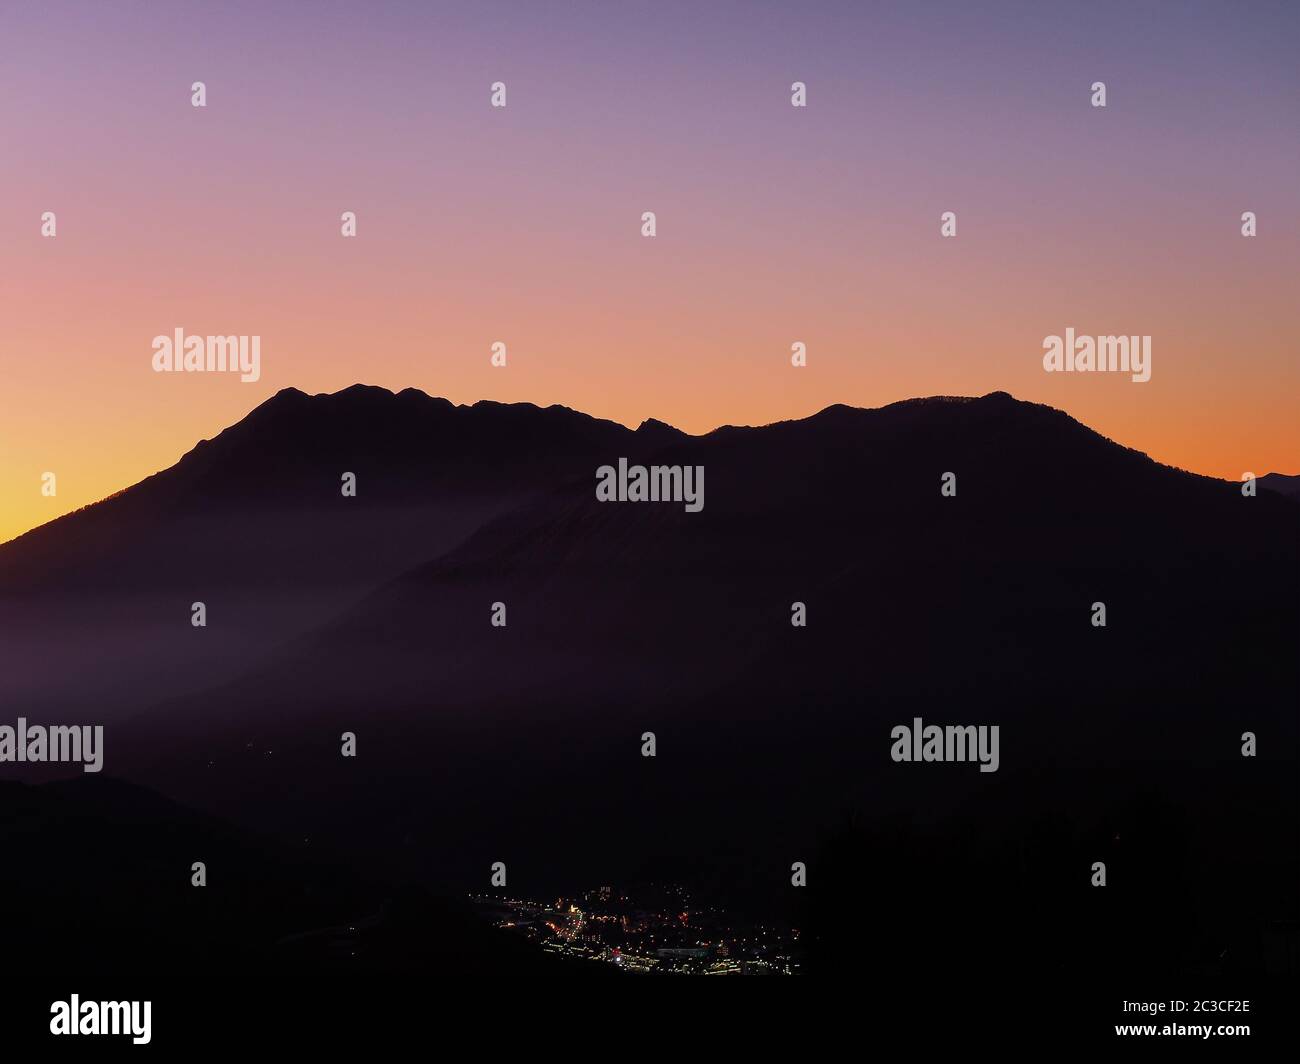 View of a town glowing in the distance surrounded by mountains against the sunset sky Stock Photo